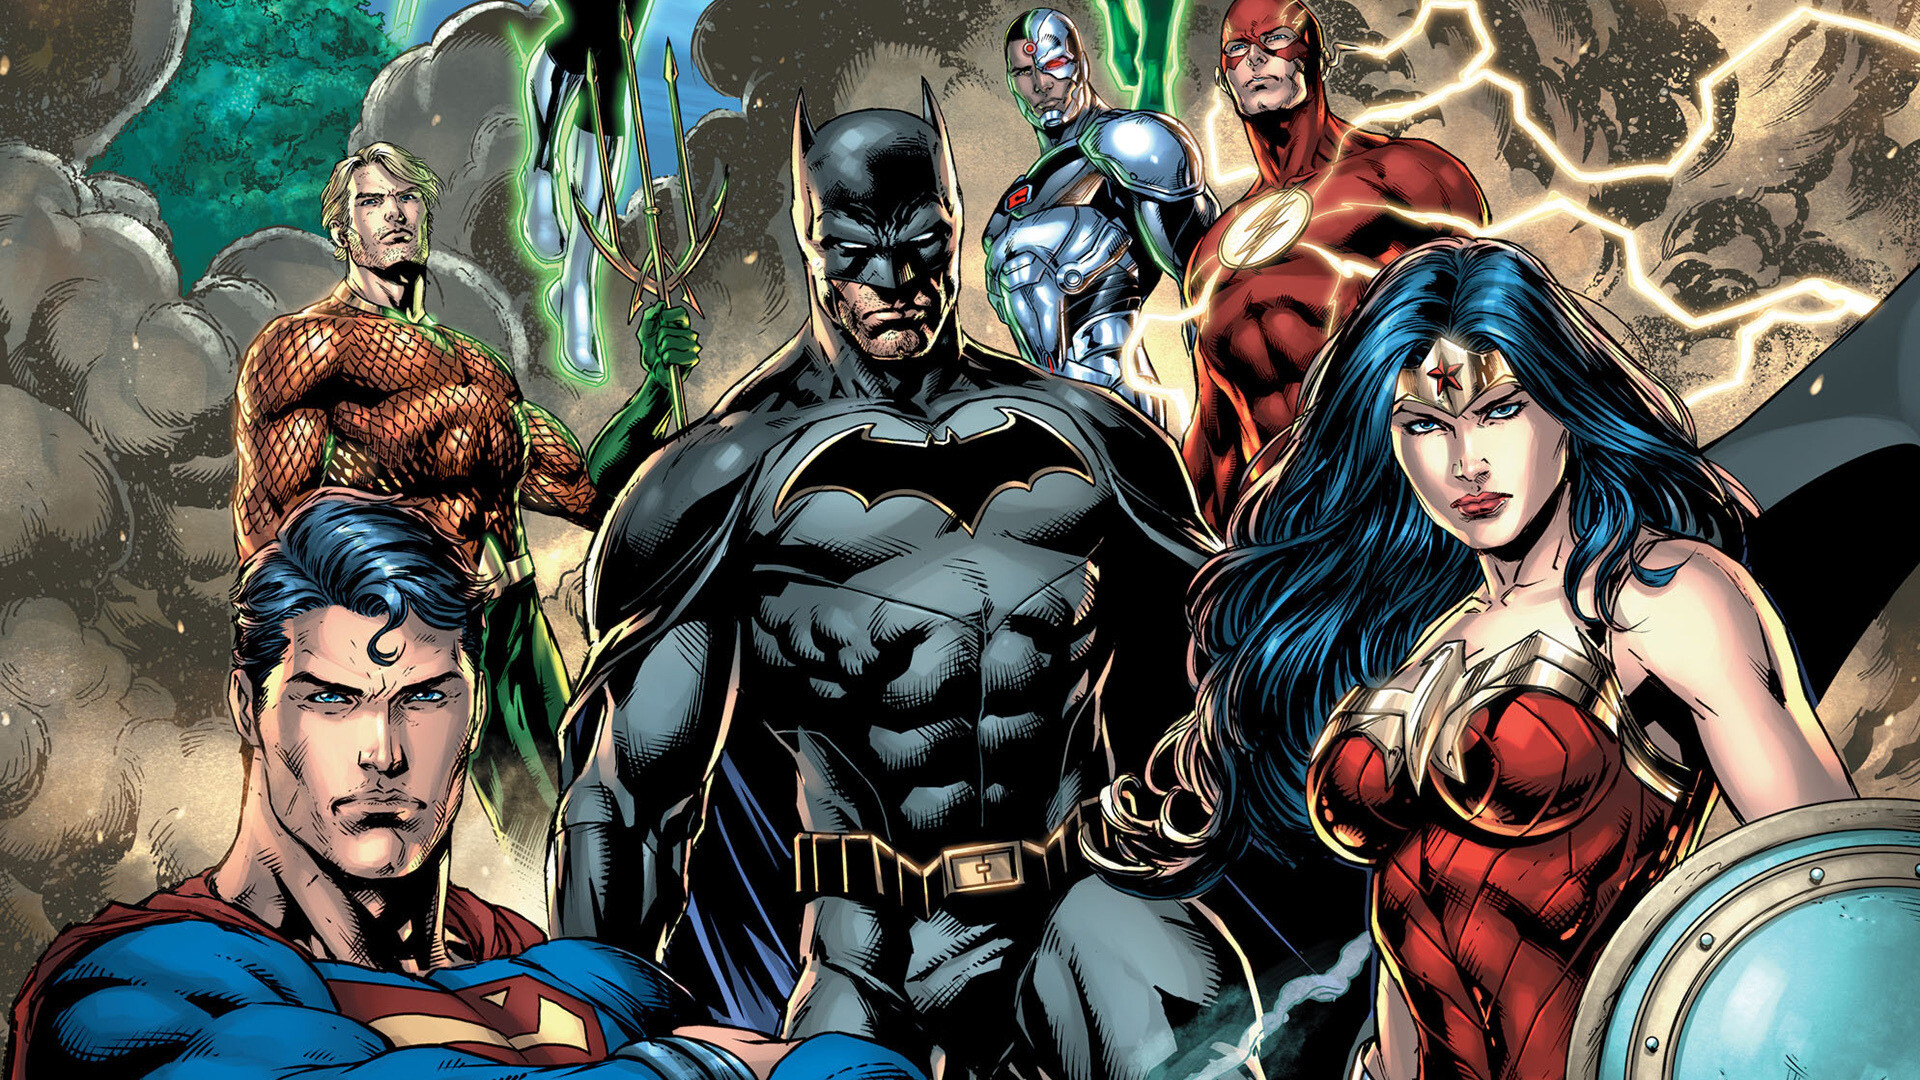 DC Heroes: The Justice League of America, A team of superheroes. 1920x1080 Full HD Wallpaper.